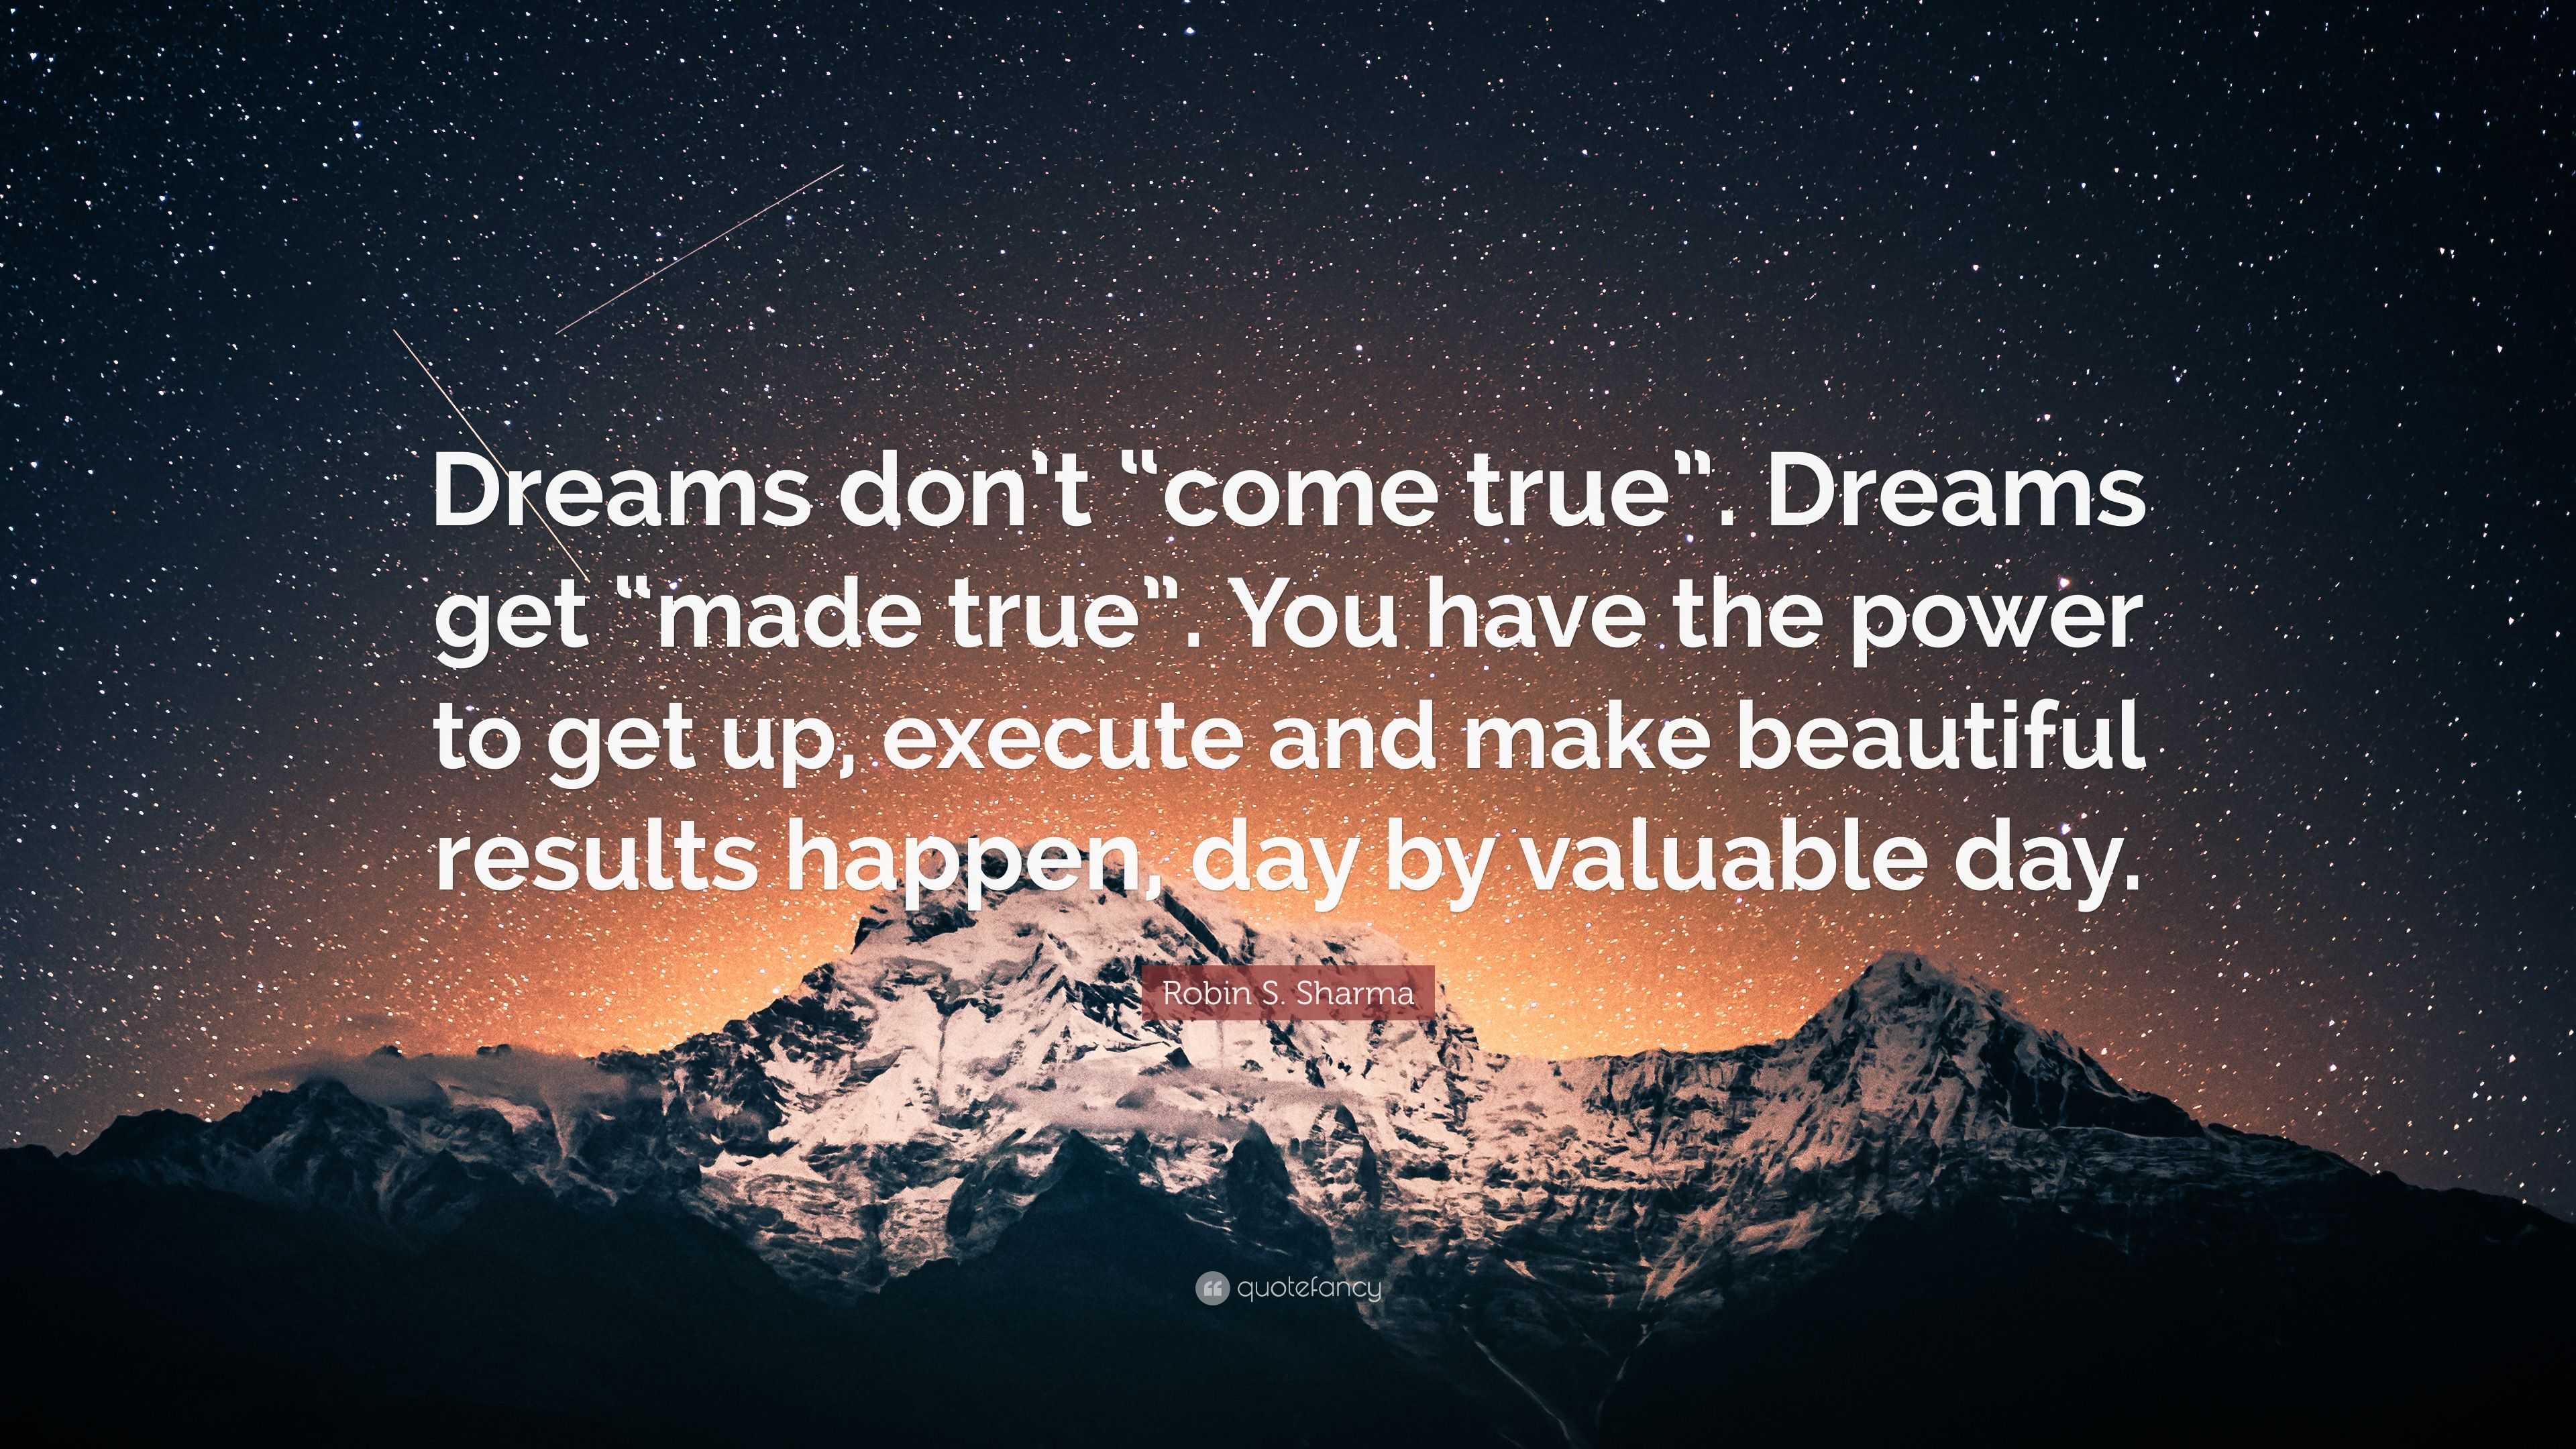 Don't be a dream crusher: the power of encouragement